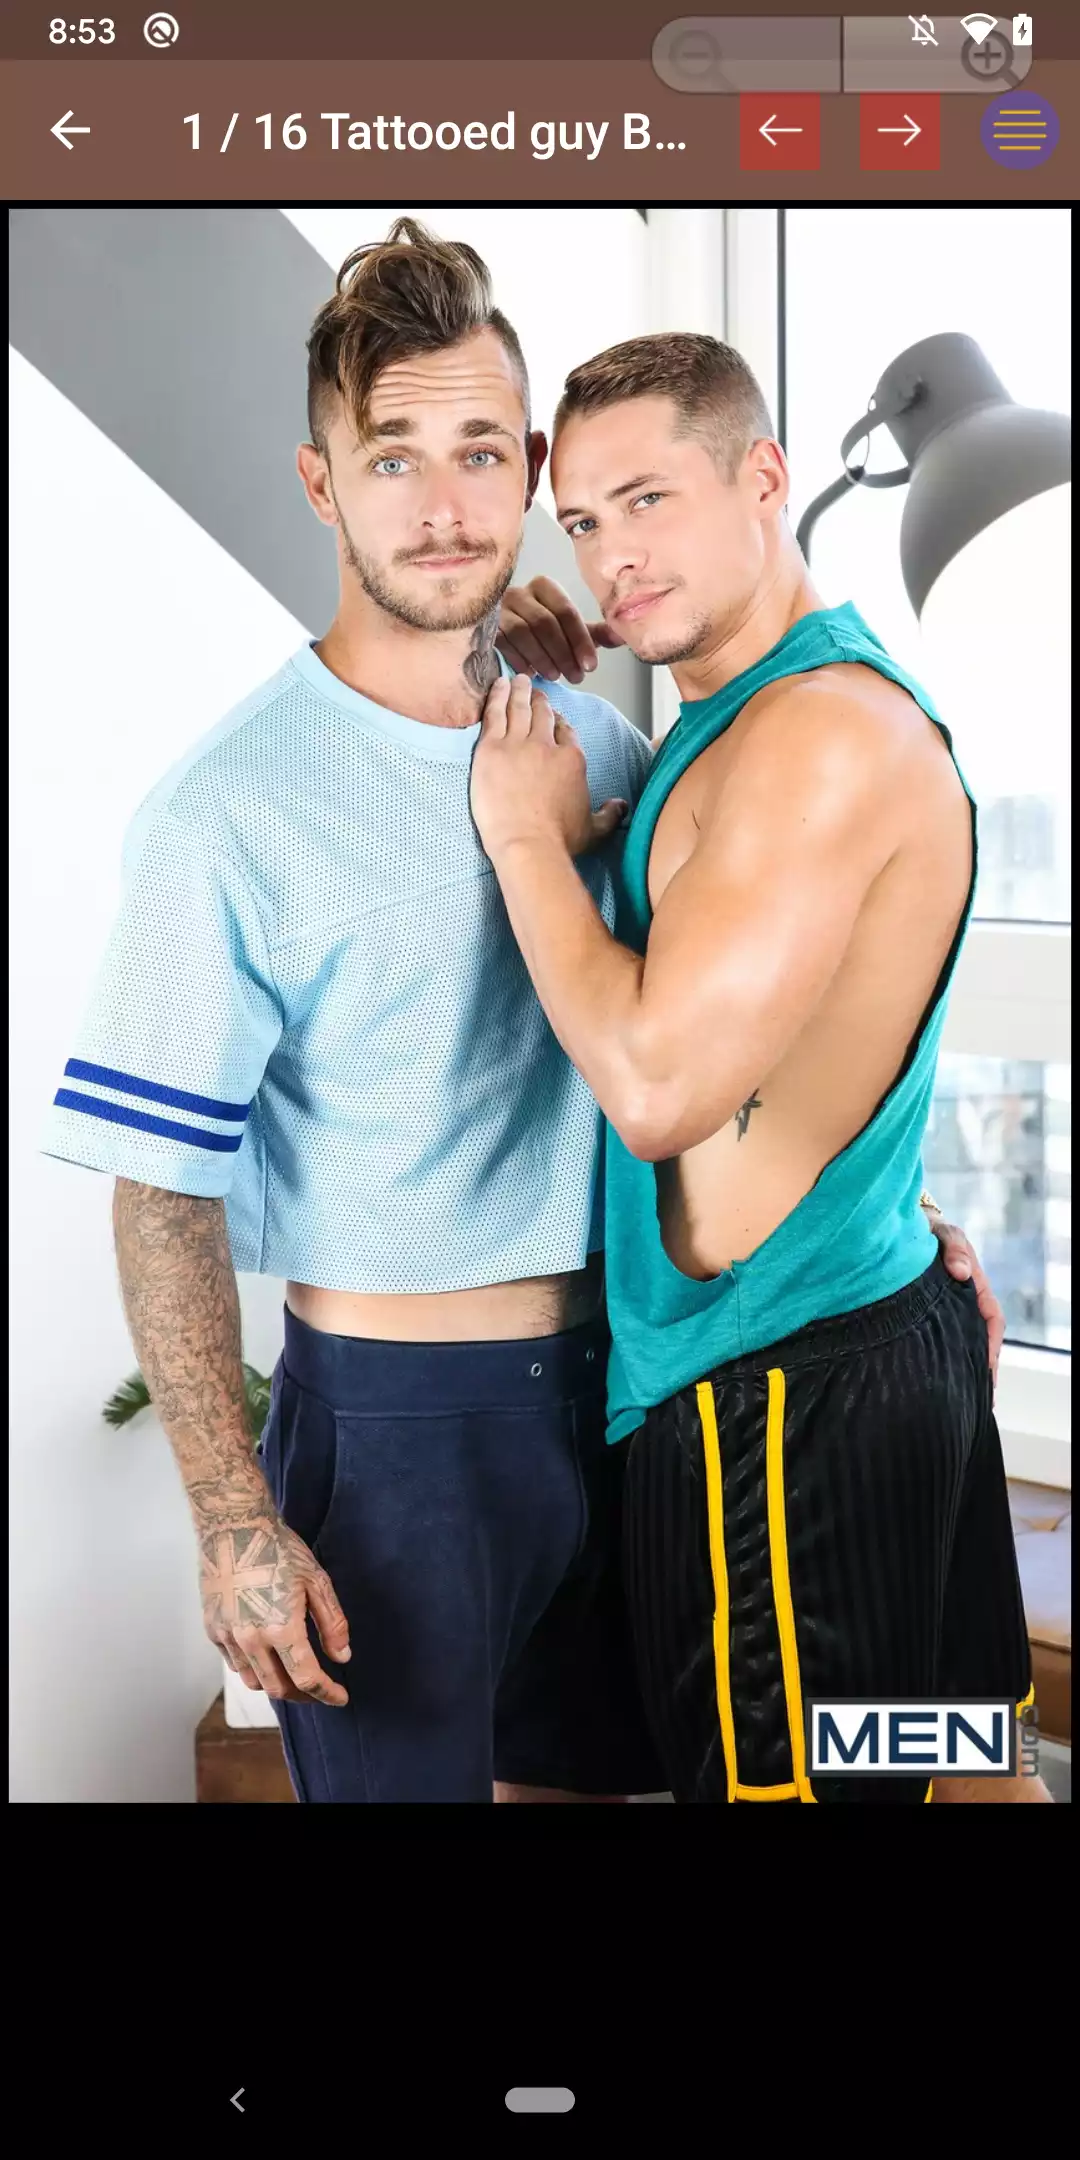 New Gay Galleries wallpapers,men,hentai,shemale,images,sexy,download,porn,free,galleries,comixharem,pics,star,hot,gay,pictures,apk,hotmilfpics,pornstar,photos,sexgalleries